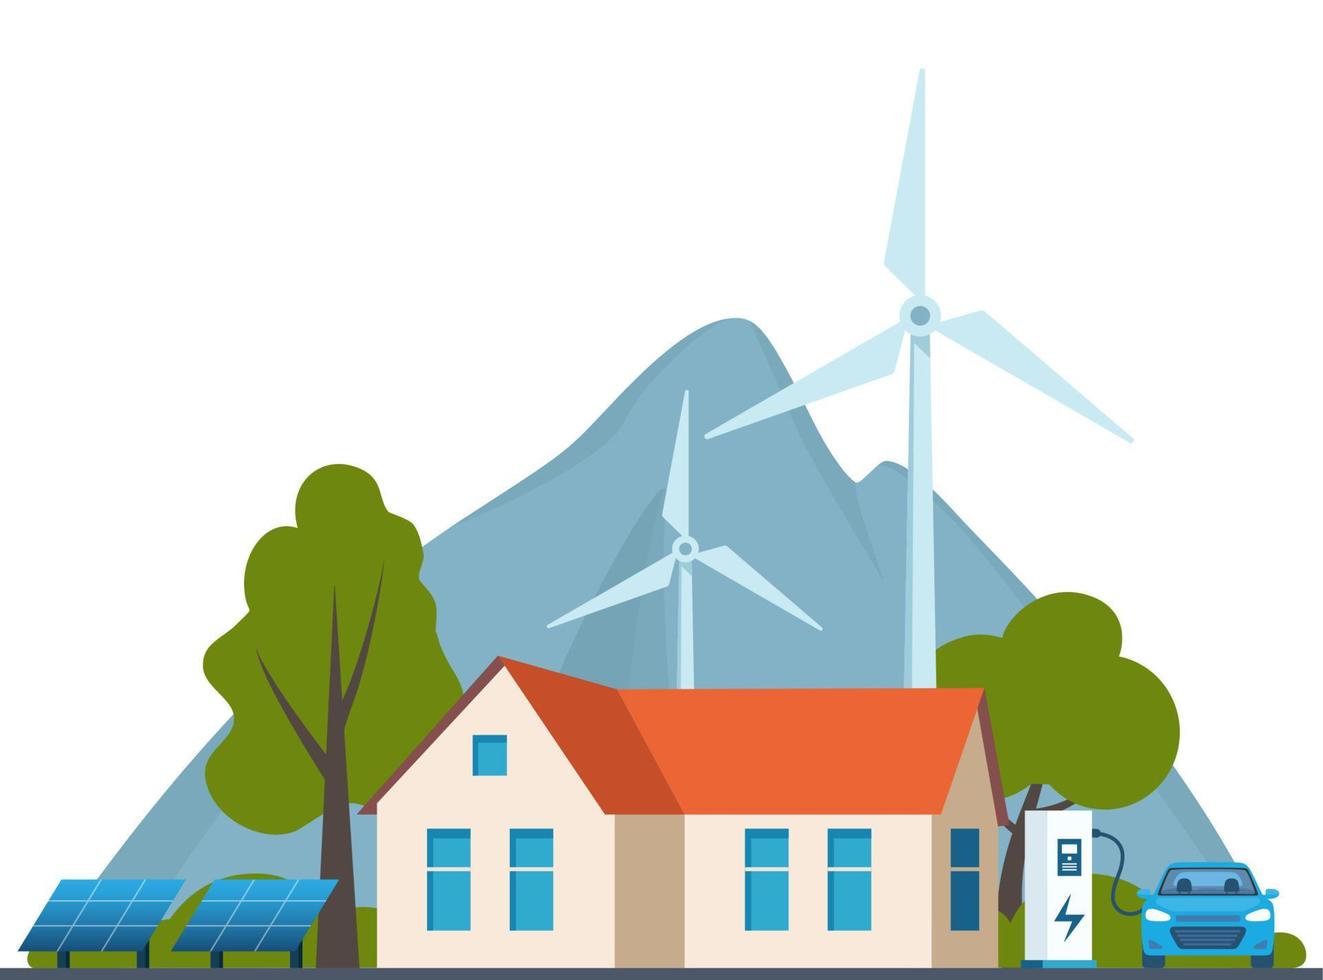 Modern Eco Private House with Windmills and Solar Energy Panels. Wind turbines, electric car charging station. Green enegry concept, vector illustration.